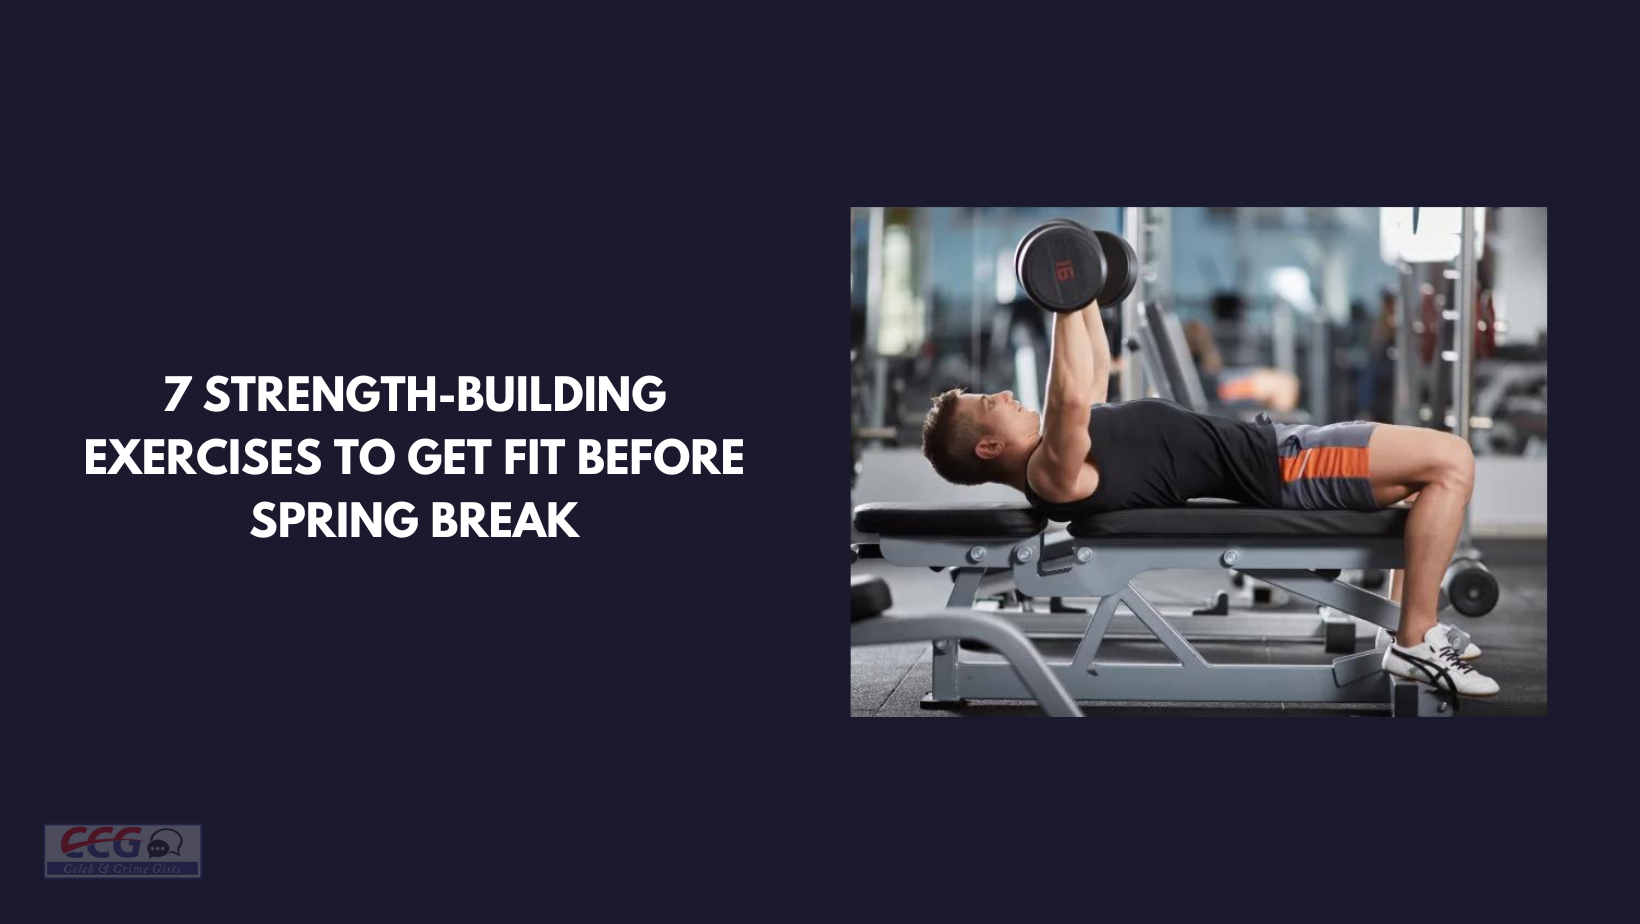 7 Strength-Building Exercises To Get Fit Before Spring Break